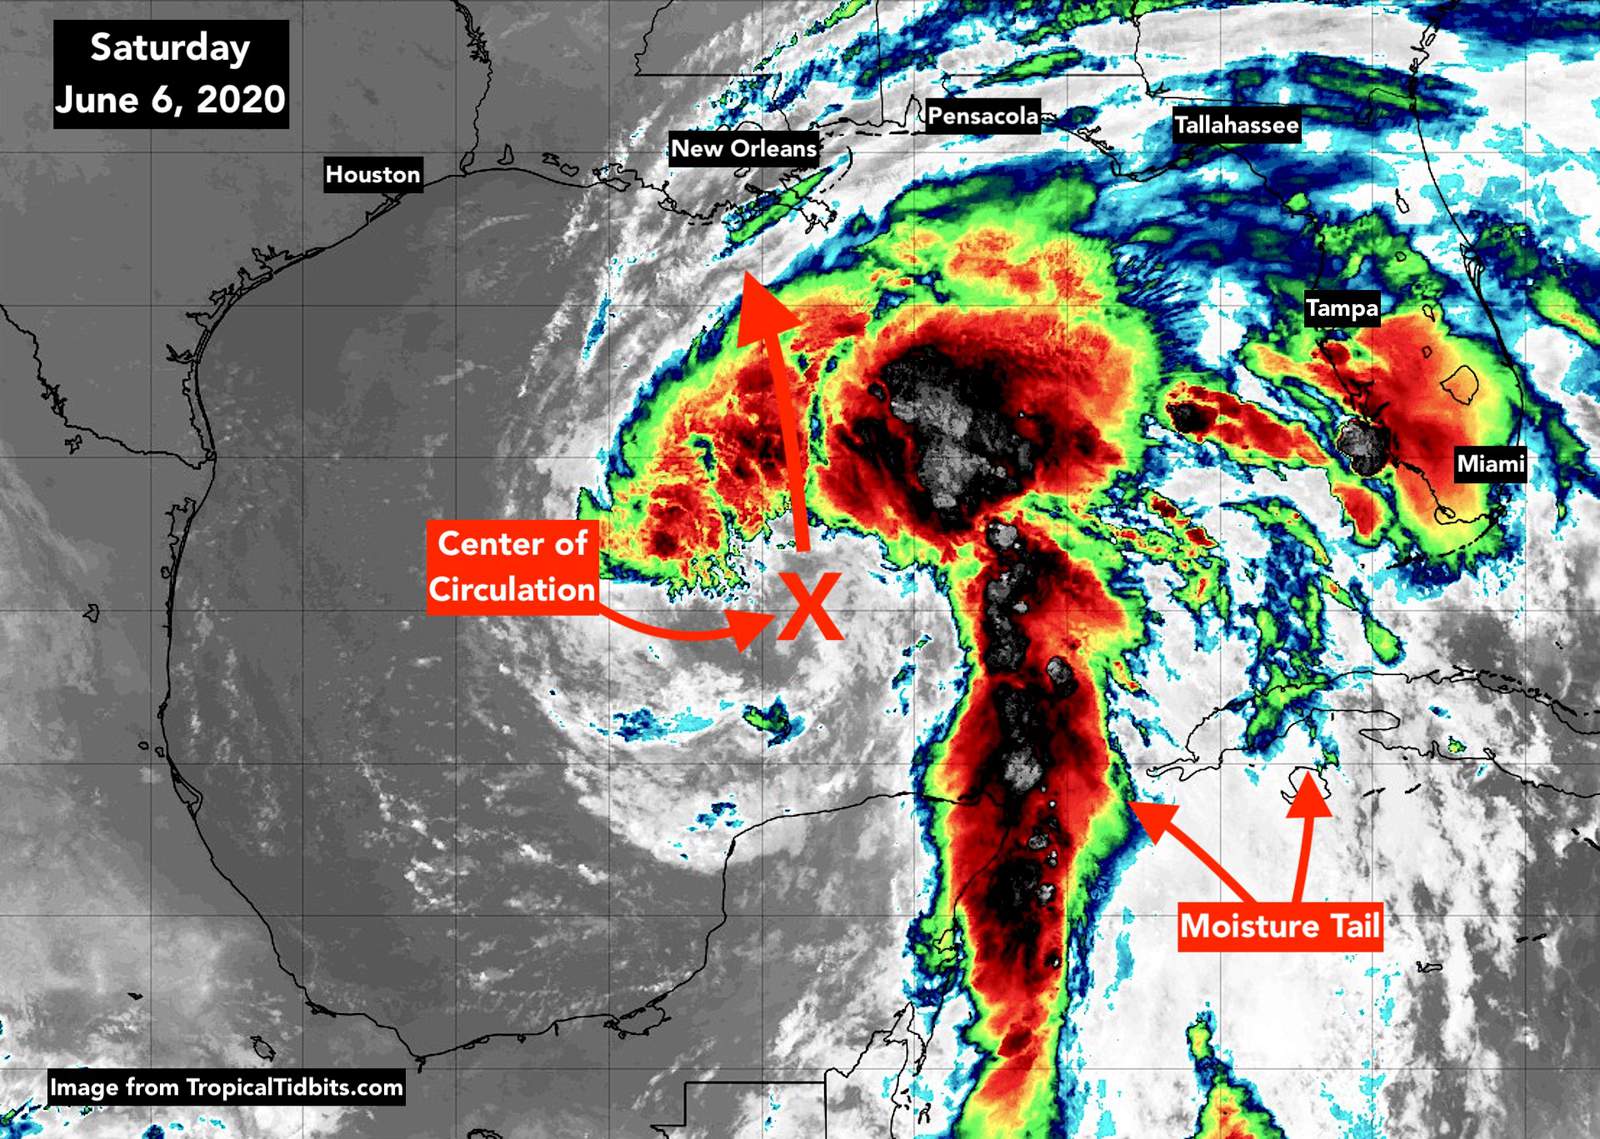 Cristobal on a beeline for the Gulf Coast, most effects stay away from South Florida